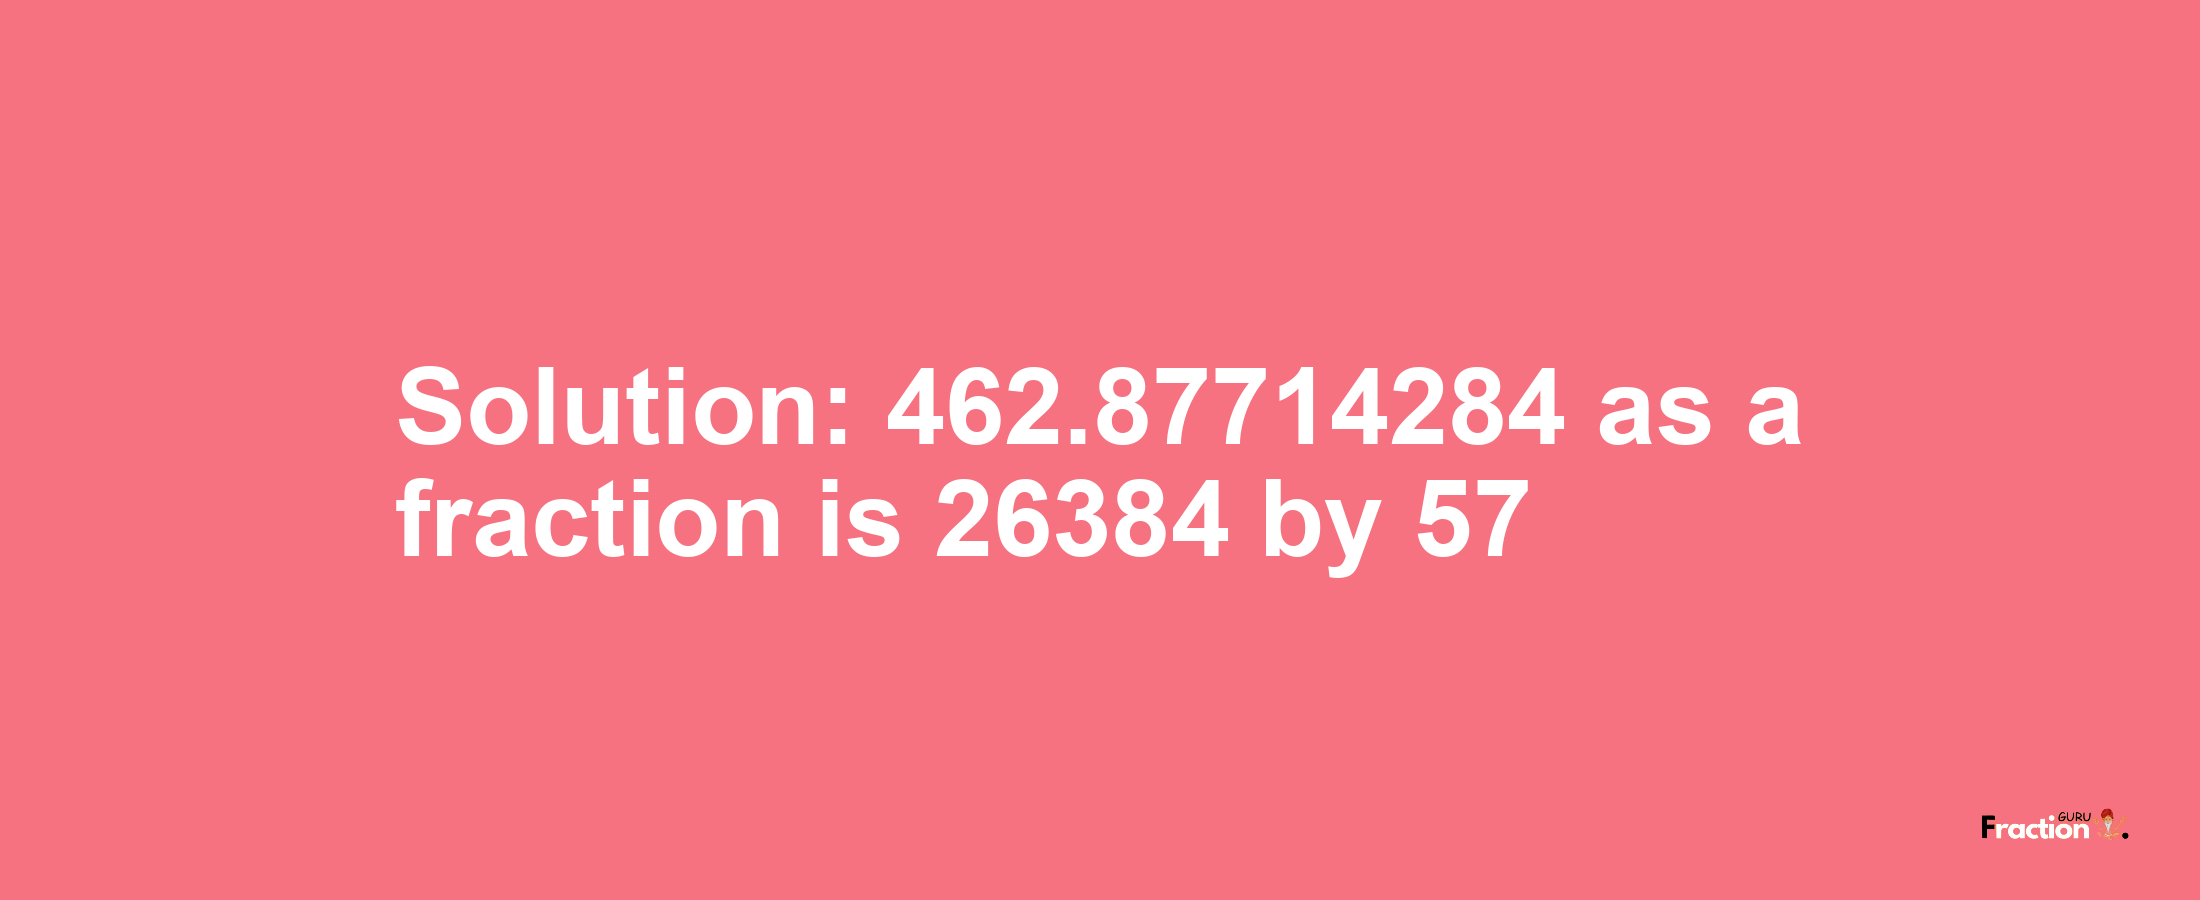 Solution:462.87714284 as a fraction is 26384/57